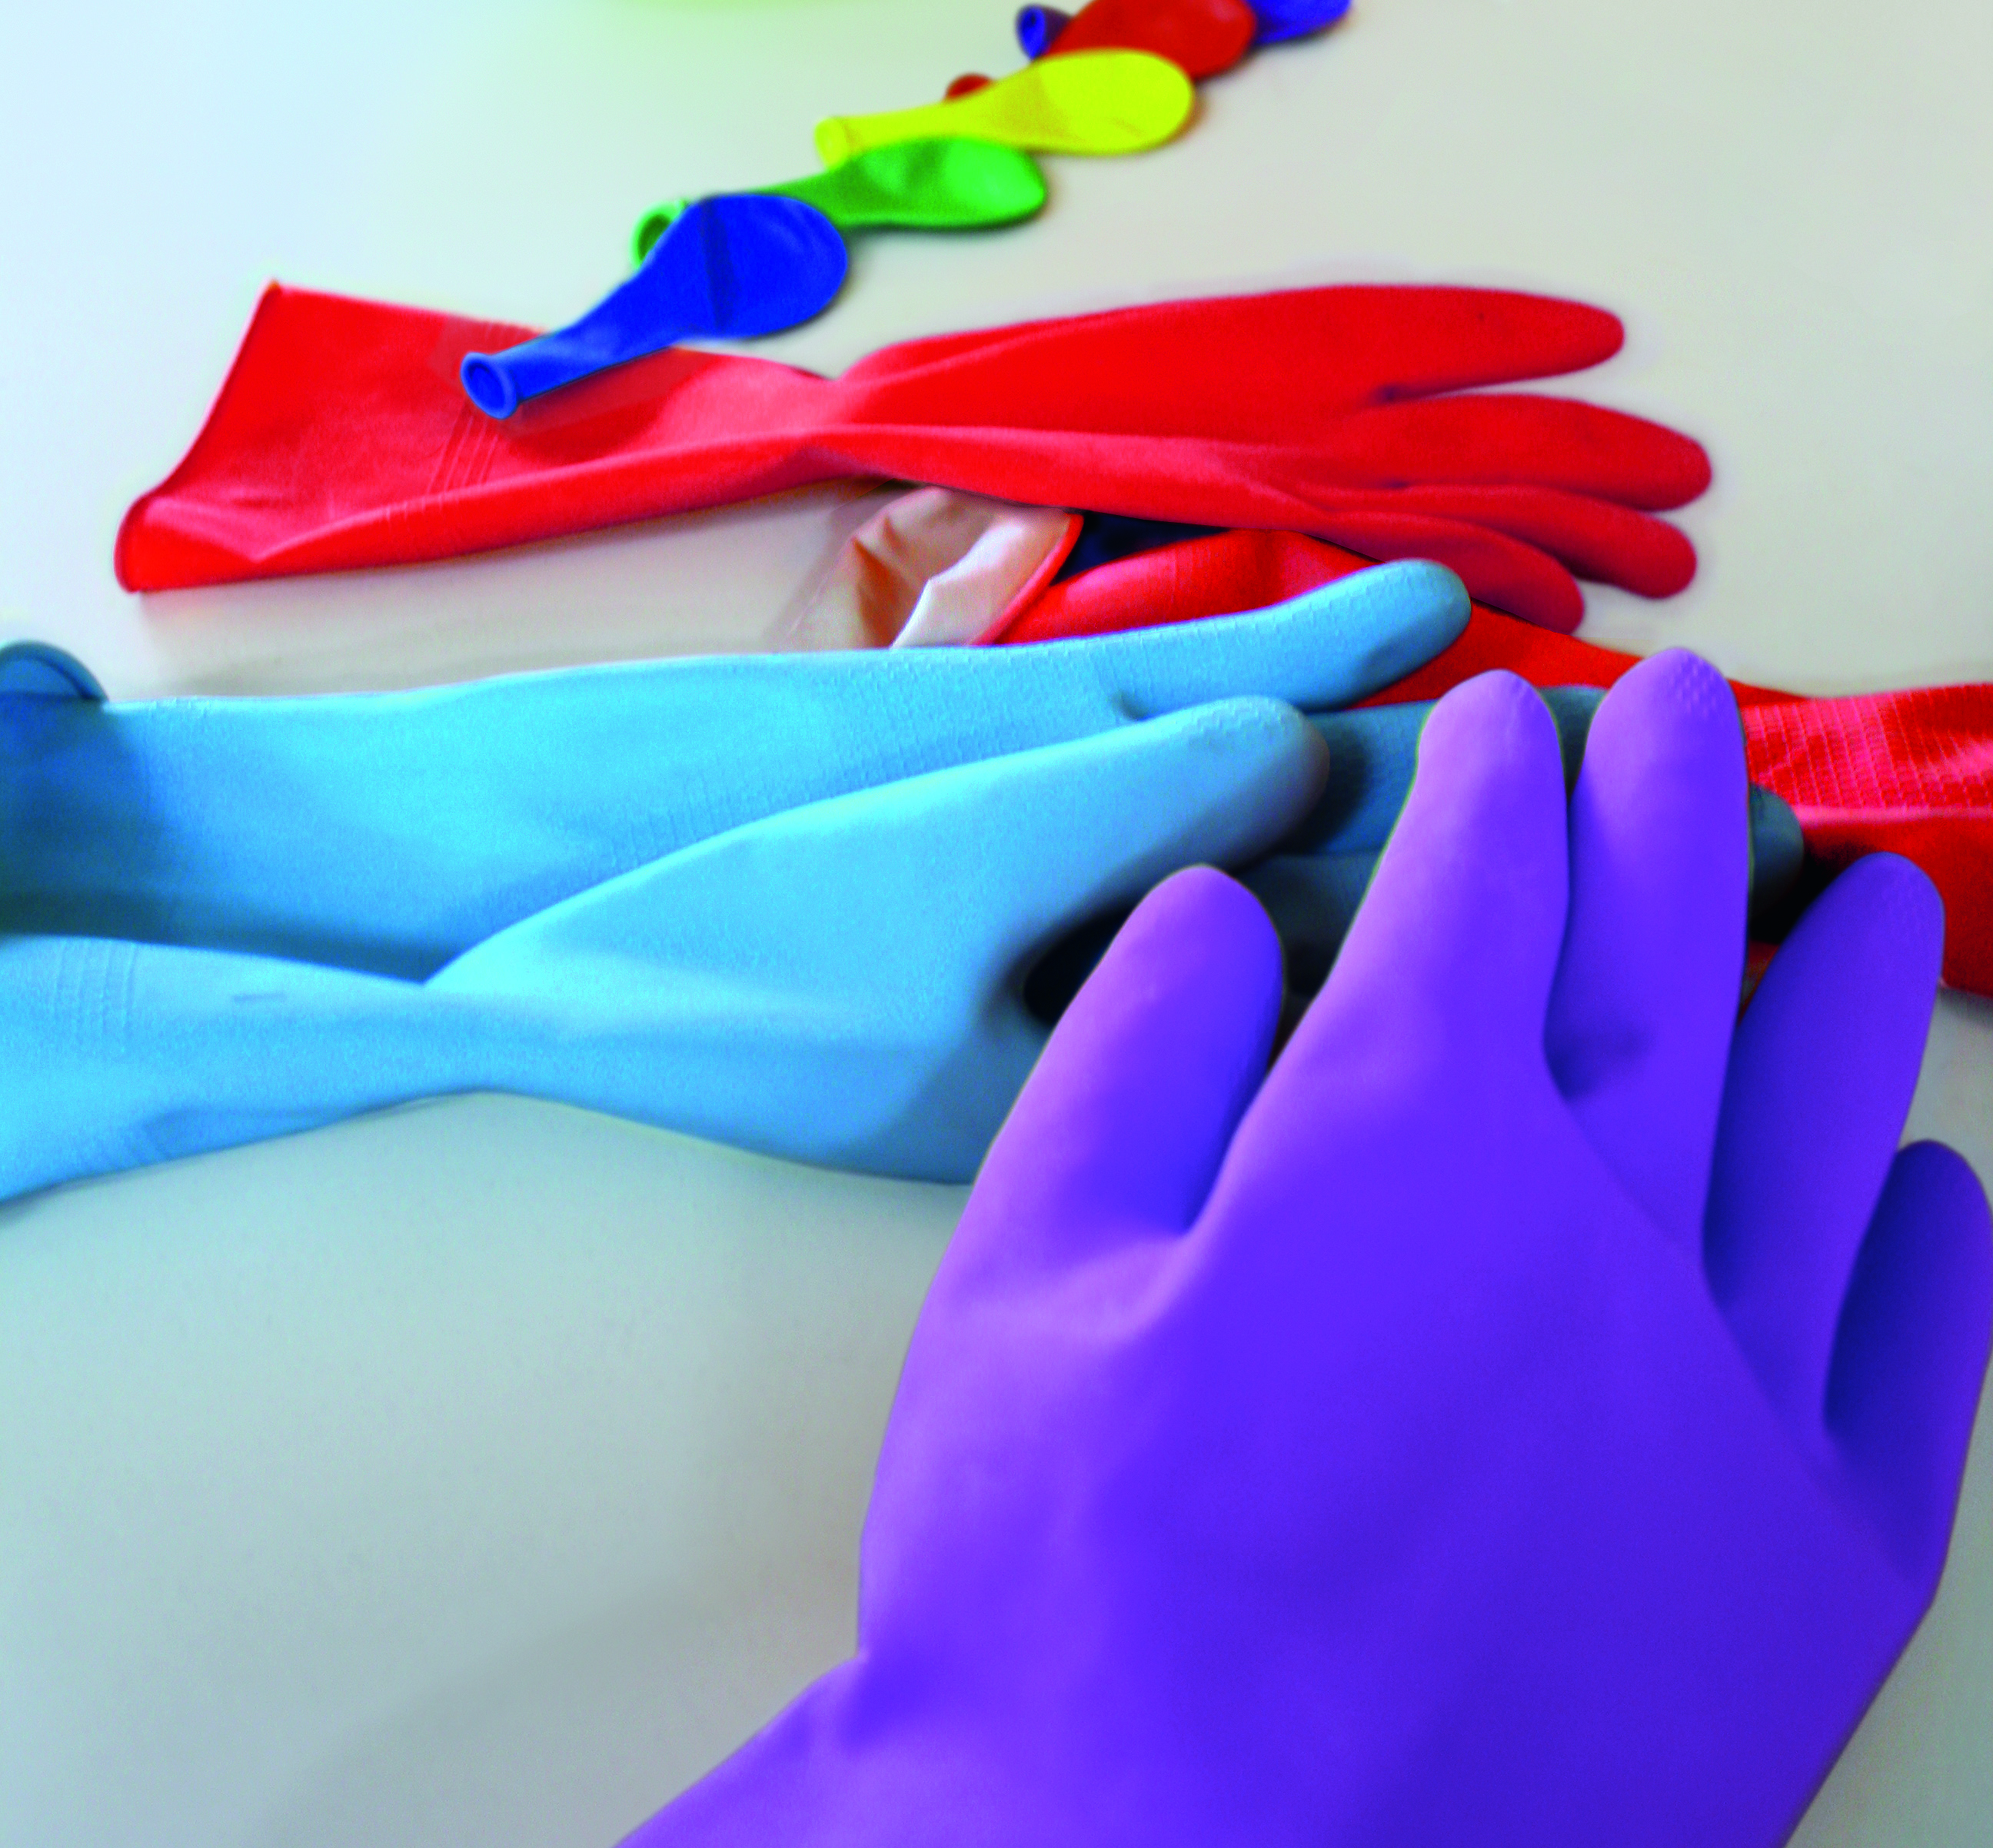 Clariant's colorants make your latex products look more colorful!
(Photo: Clariant)